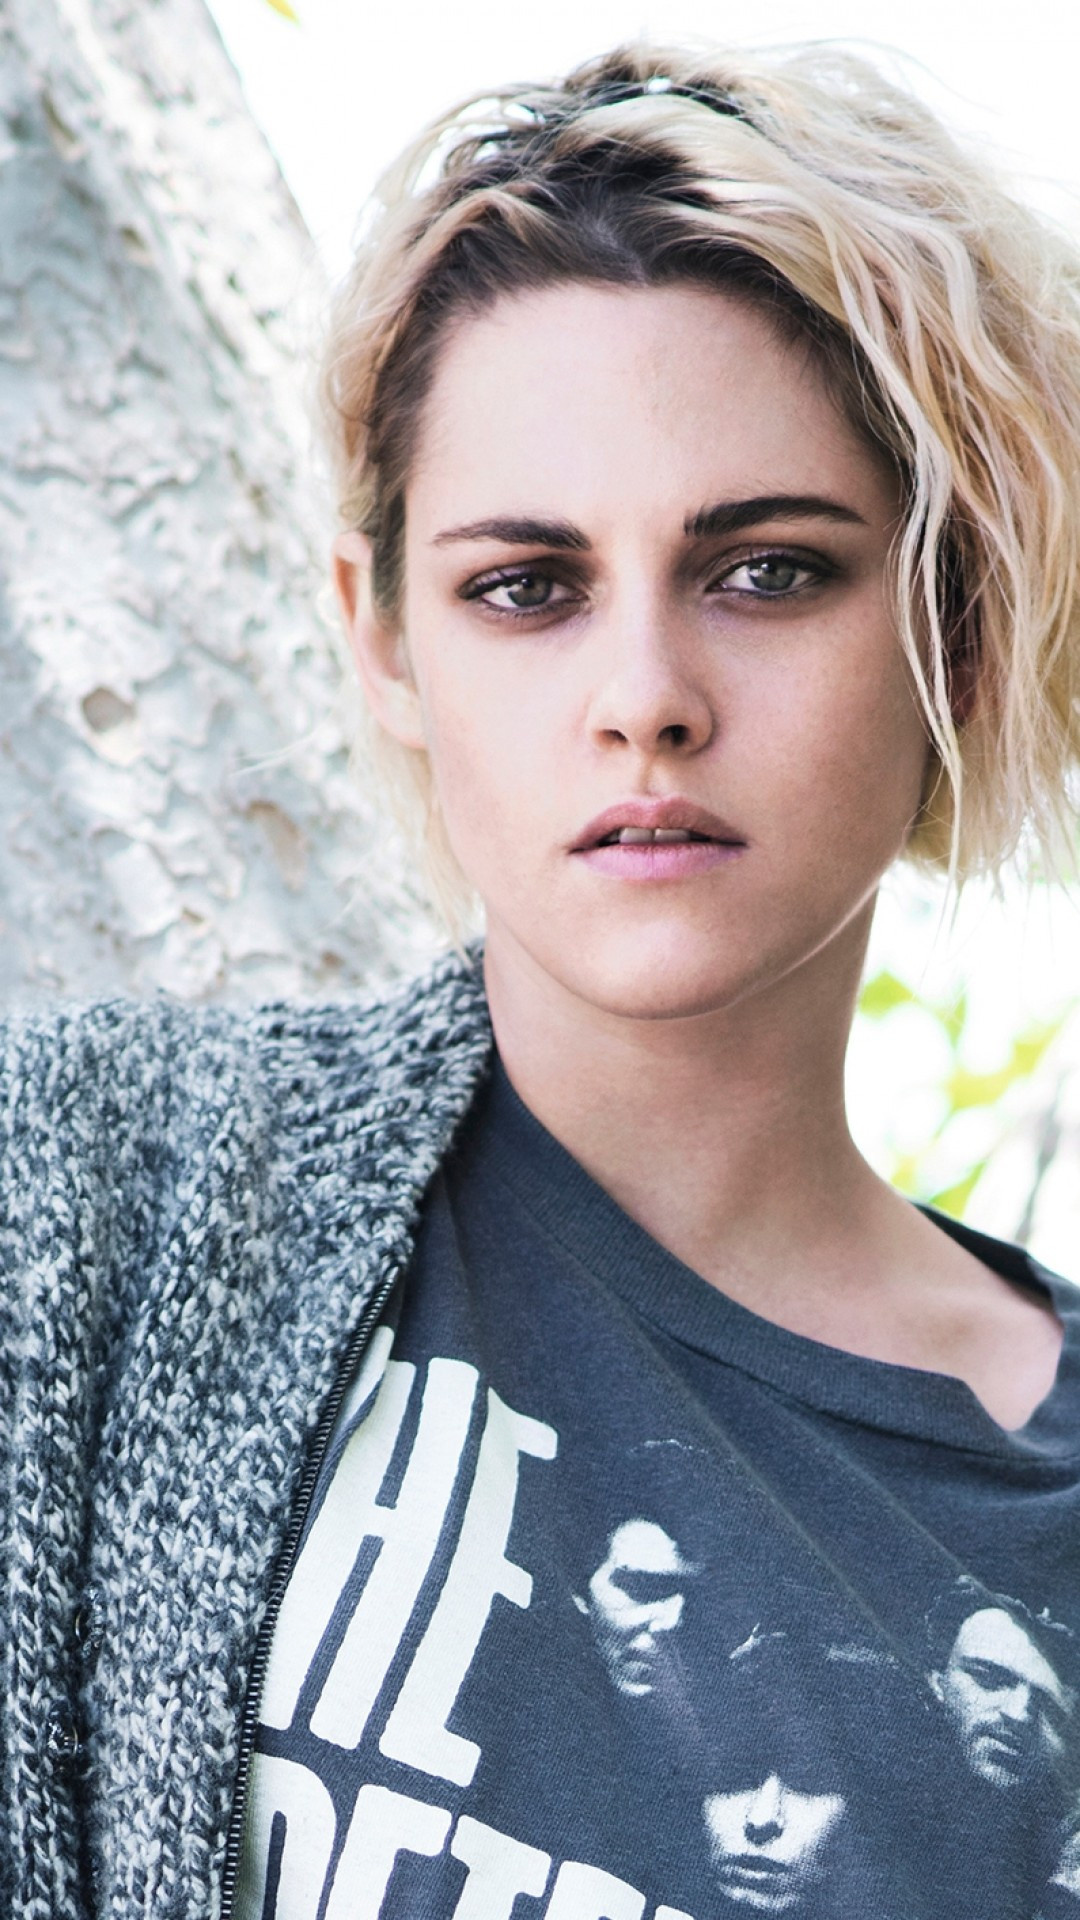 Kristen Stewart: Ranked by Forbes as the world's highest-paid actress in 2012, with total earnings of $34.5 million. 1080x1920 Full HD Background.